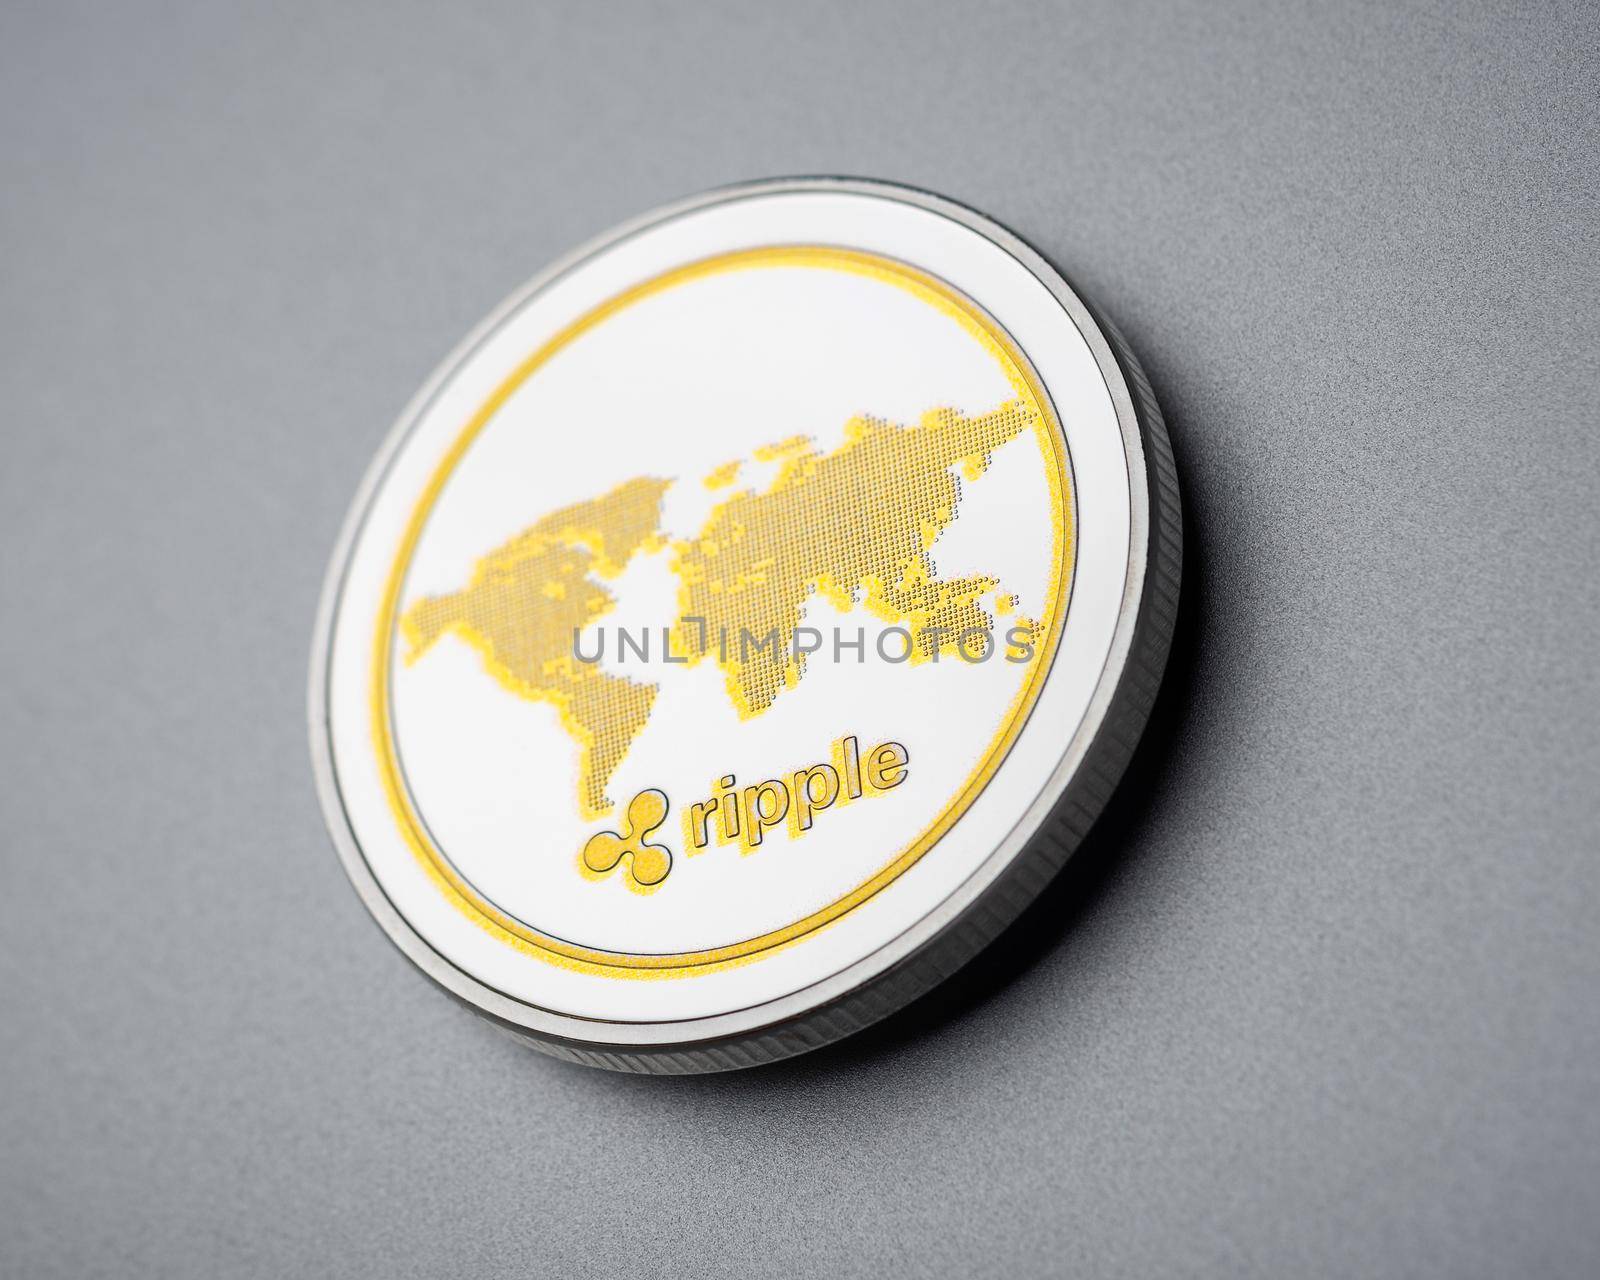 Ripple coin on brushed aluminium background by dutourdumonde